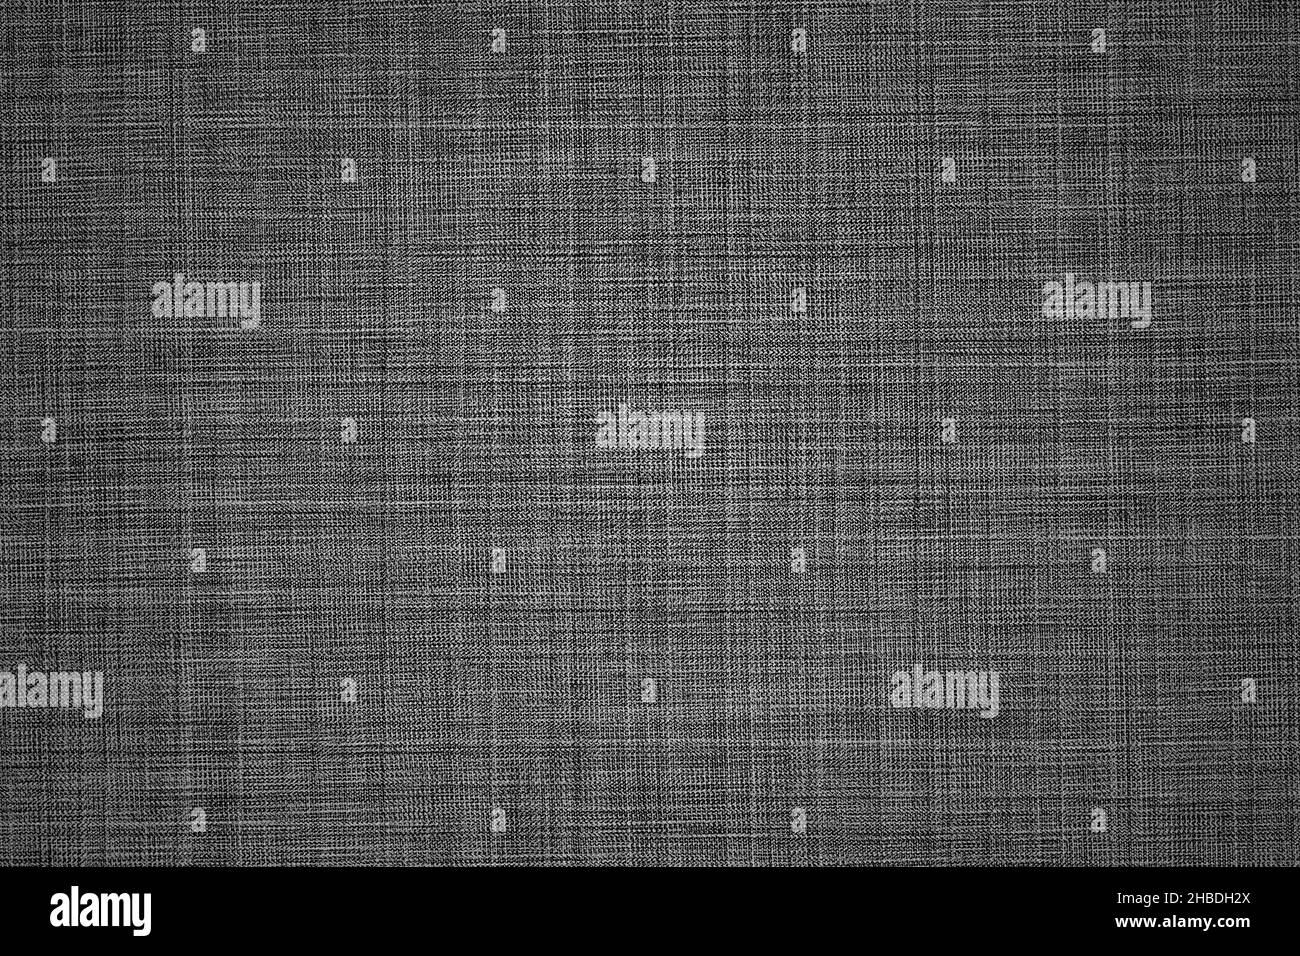 Dark blue linen fabric texture for background Stock Photo - Alamy